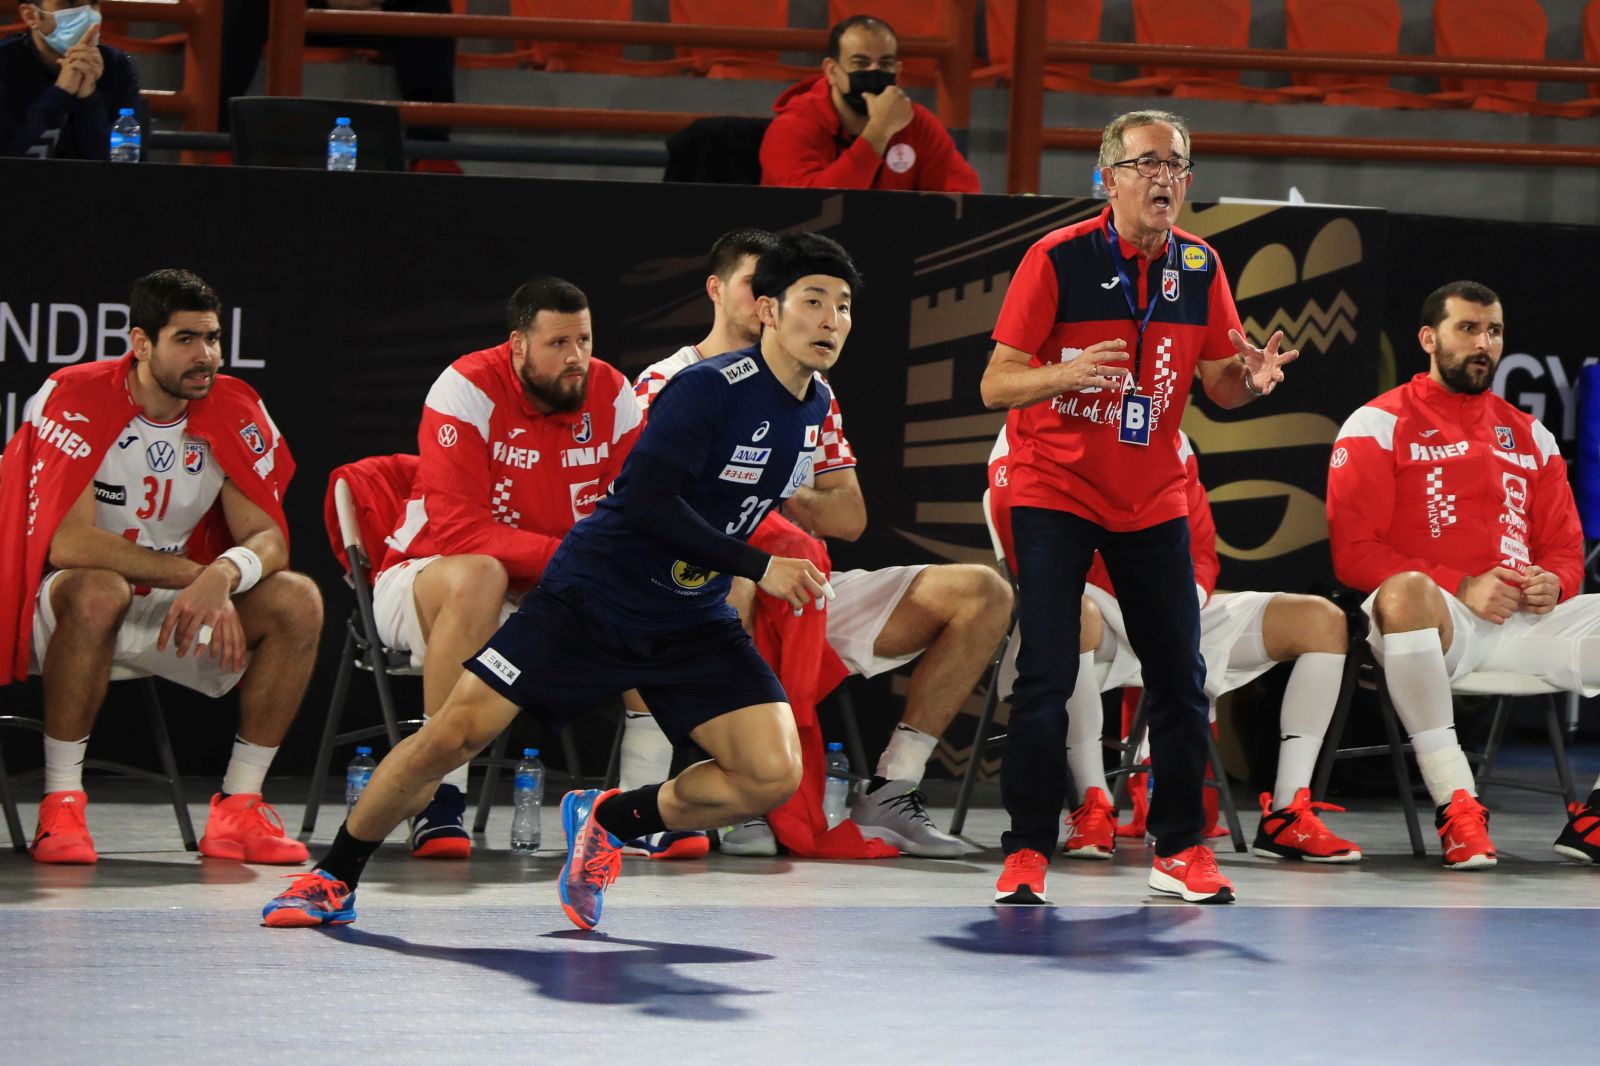 epa08939908 A handout photo made available by Egypt Handball 2021 of Croatian coach Lino Cervar (R) during the match between Croatia and Japan at the 27th Men's Handball World Championship in Alexandria, Egypt, 15 January 2021.  EPA/Hazem Gouda / Egypt Handball 2021 HANDOUT  SHUTTERSTOCK OUT HANDOUT EDITORIAL USE ONLY/NO SALES